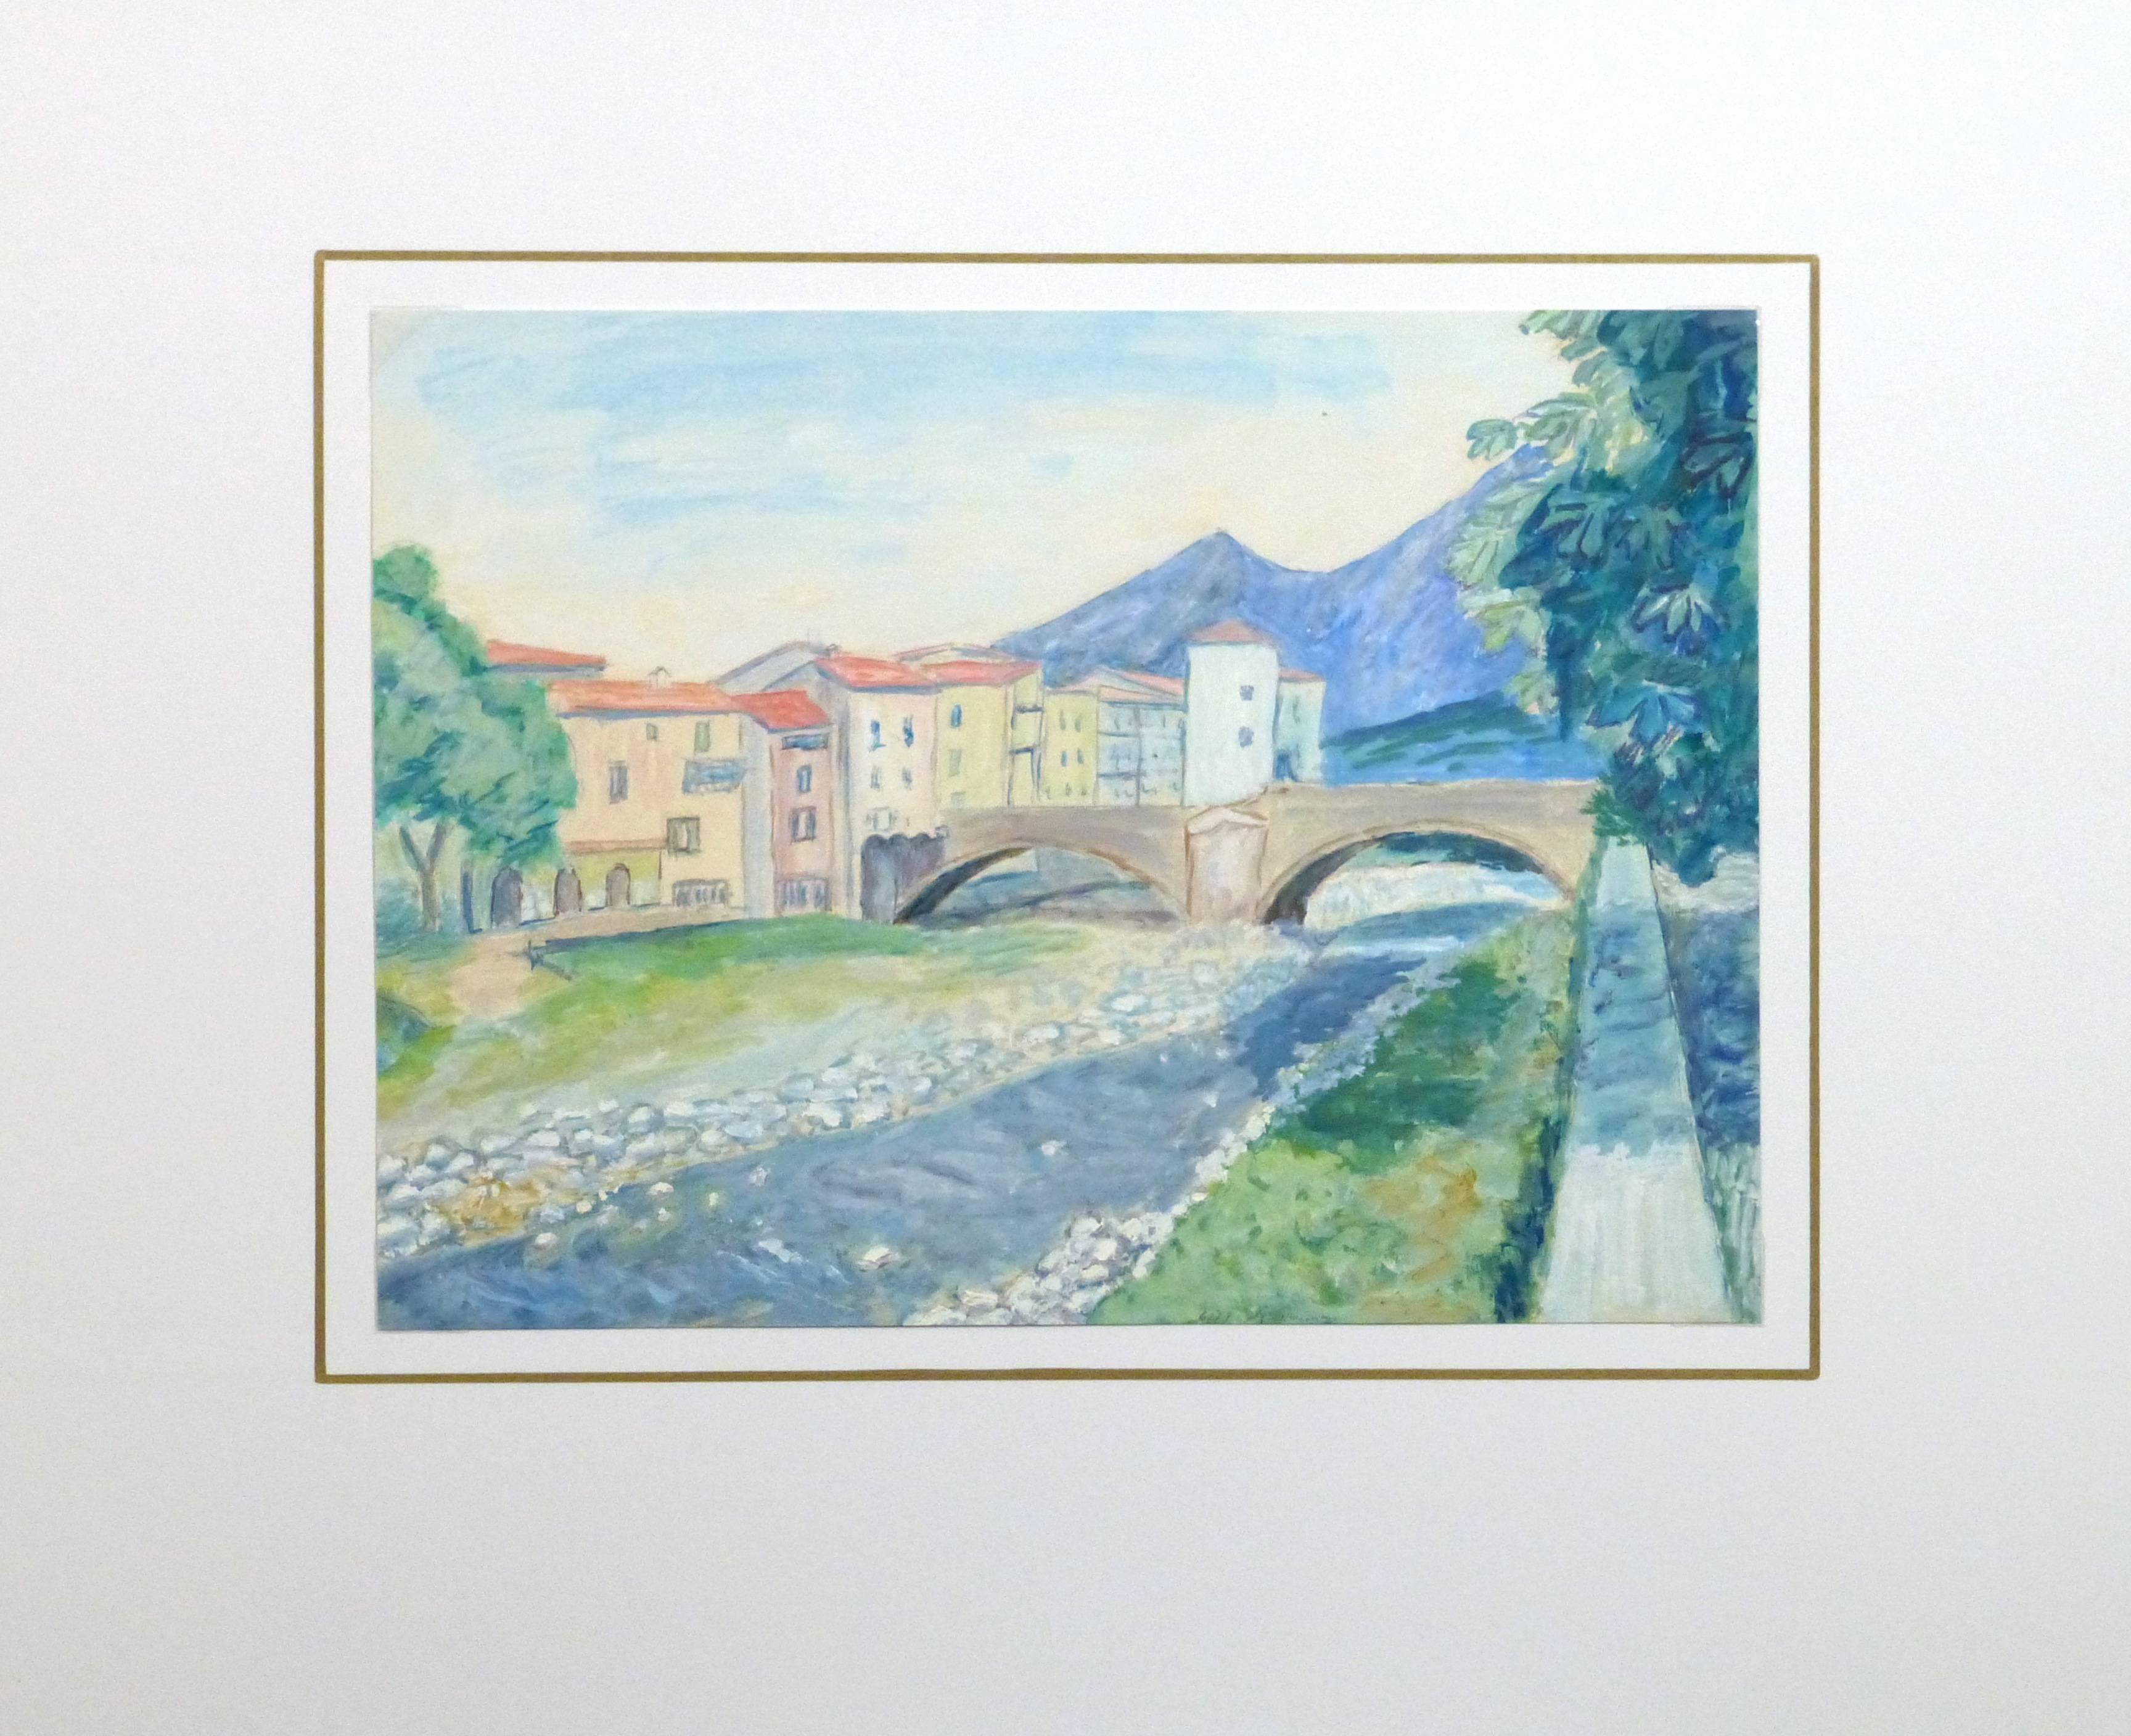 Pastel hued landscape of a small town bordering a small river near the pre-Alpes mountains by French artist A. Guillaume, 1979.

Original artwork on paper displayed on a white mat with a gold border. Mat fits a standard-size frame. Archival